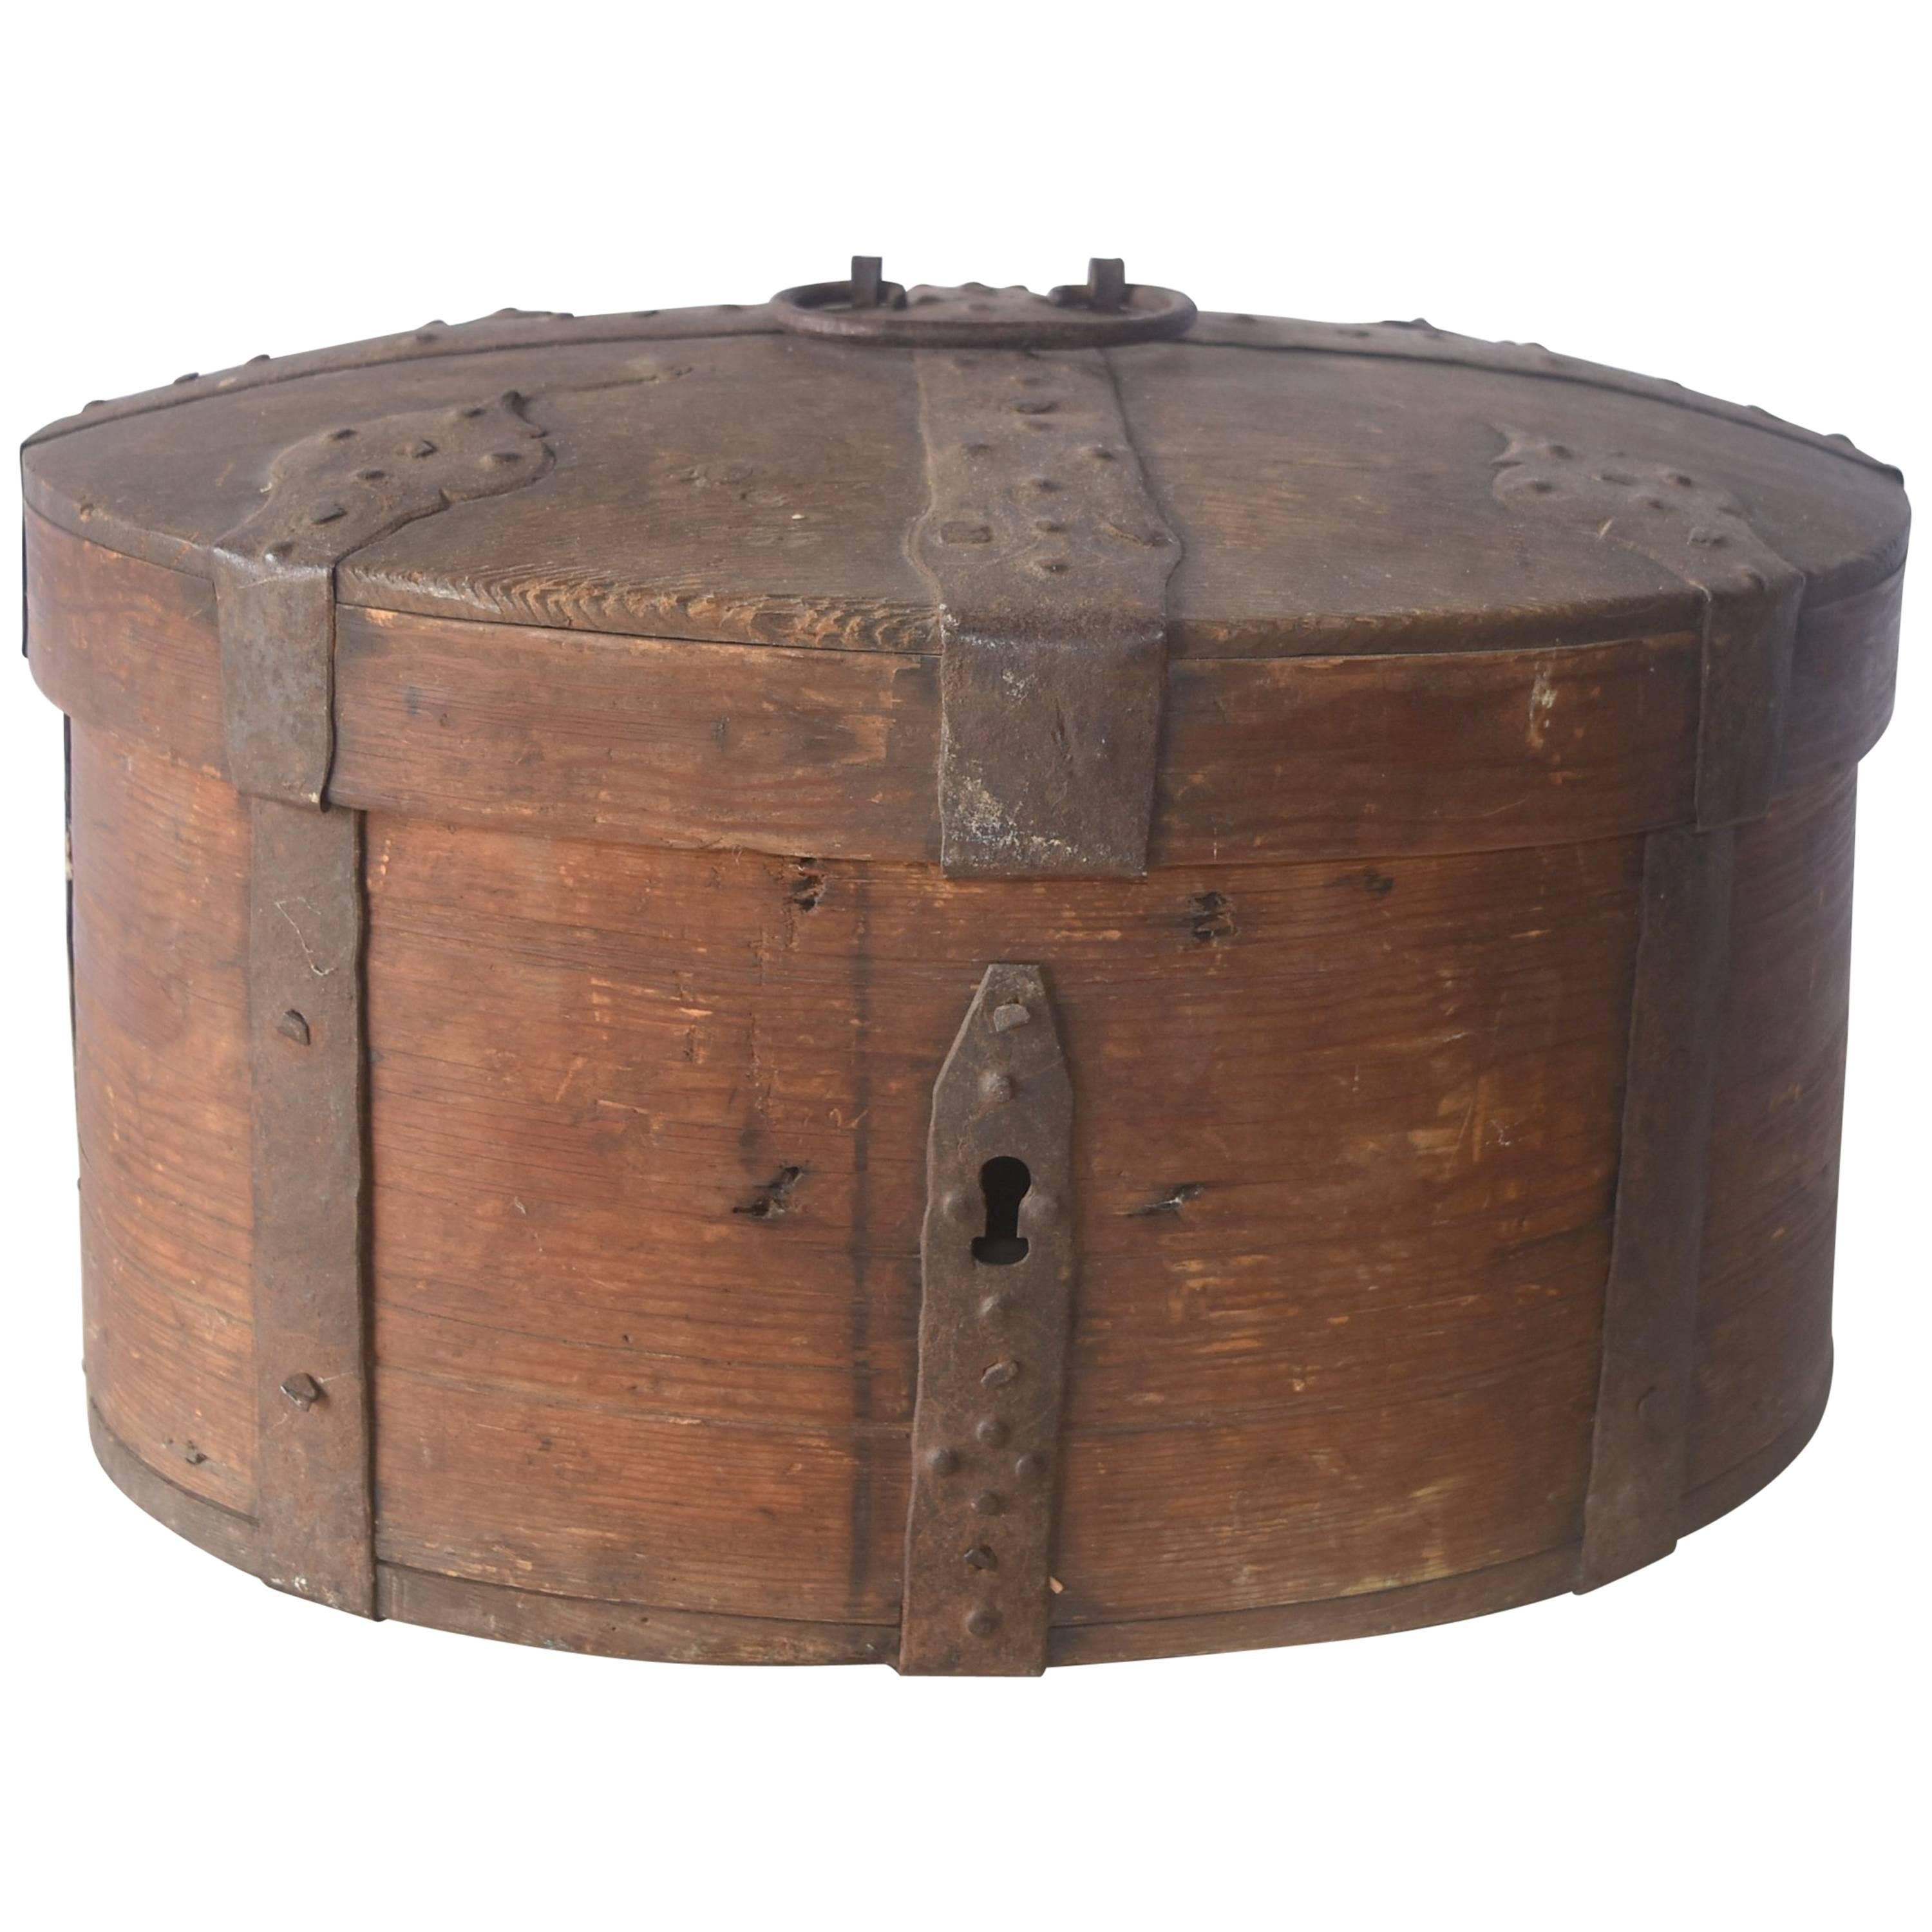 19th Century Wooden Swedish Food Box with Iron Straps and Handle